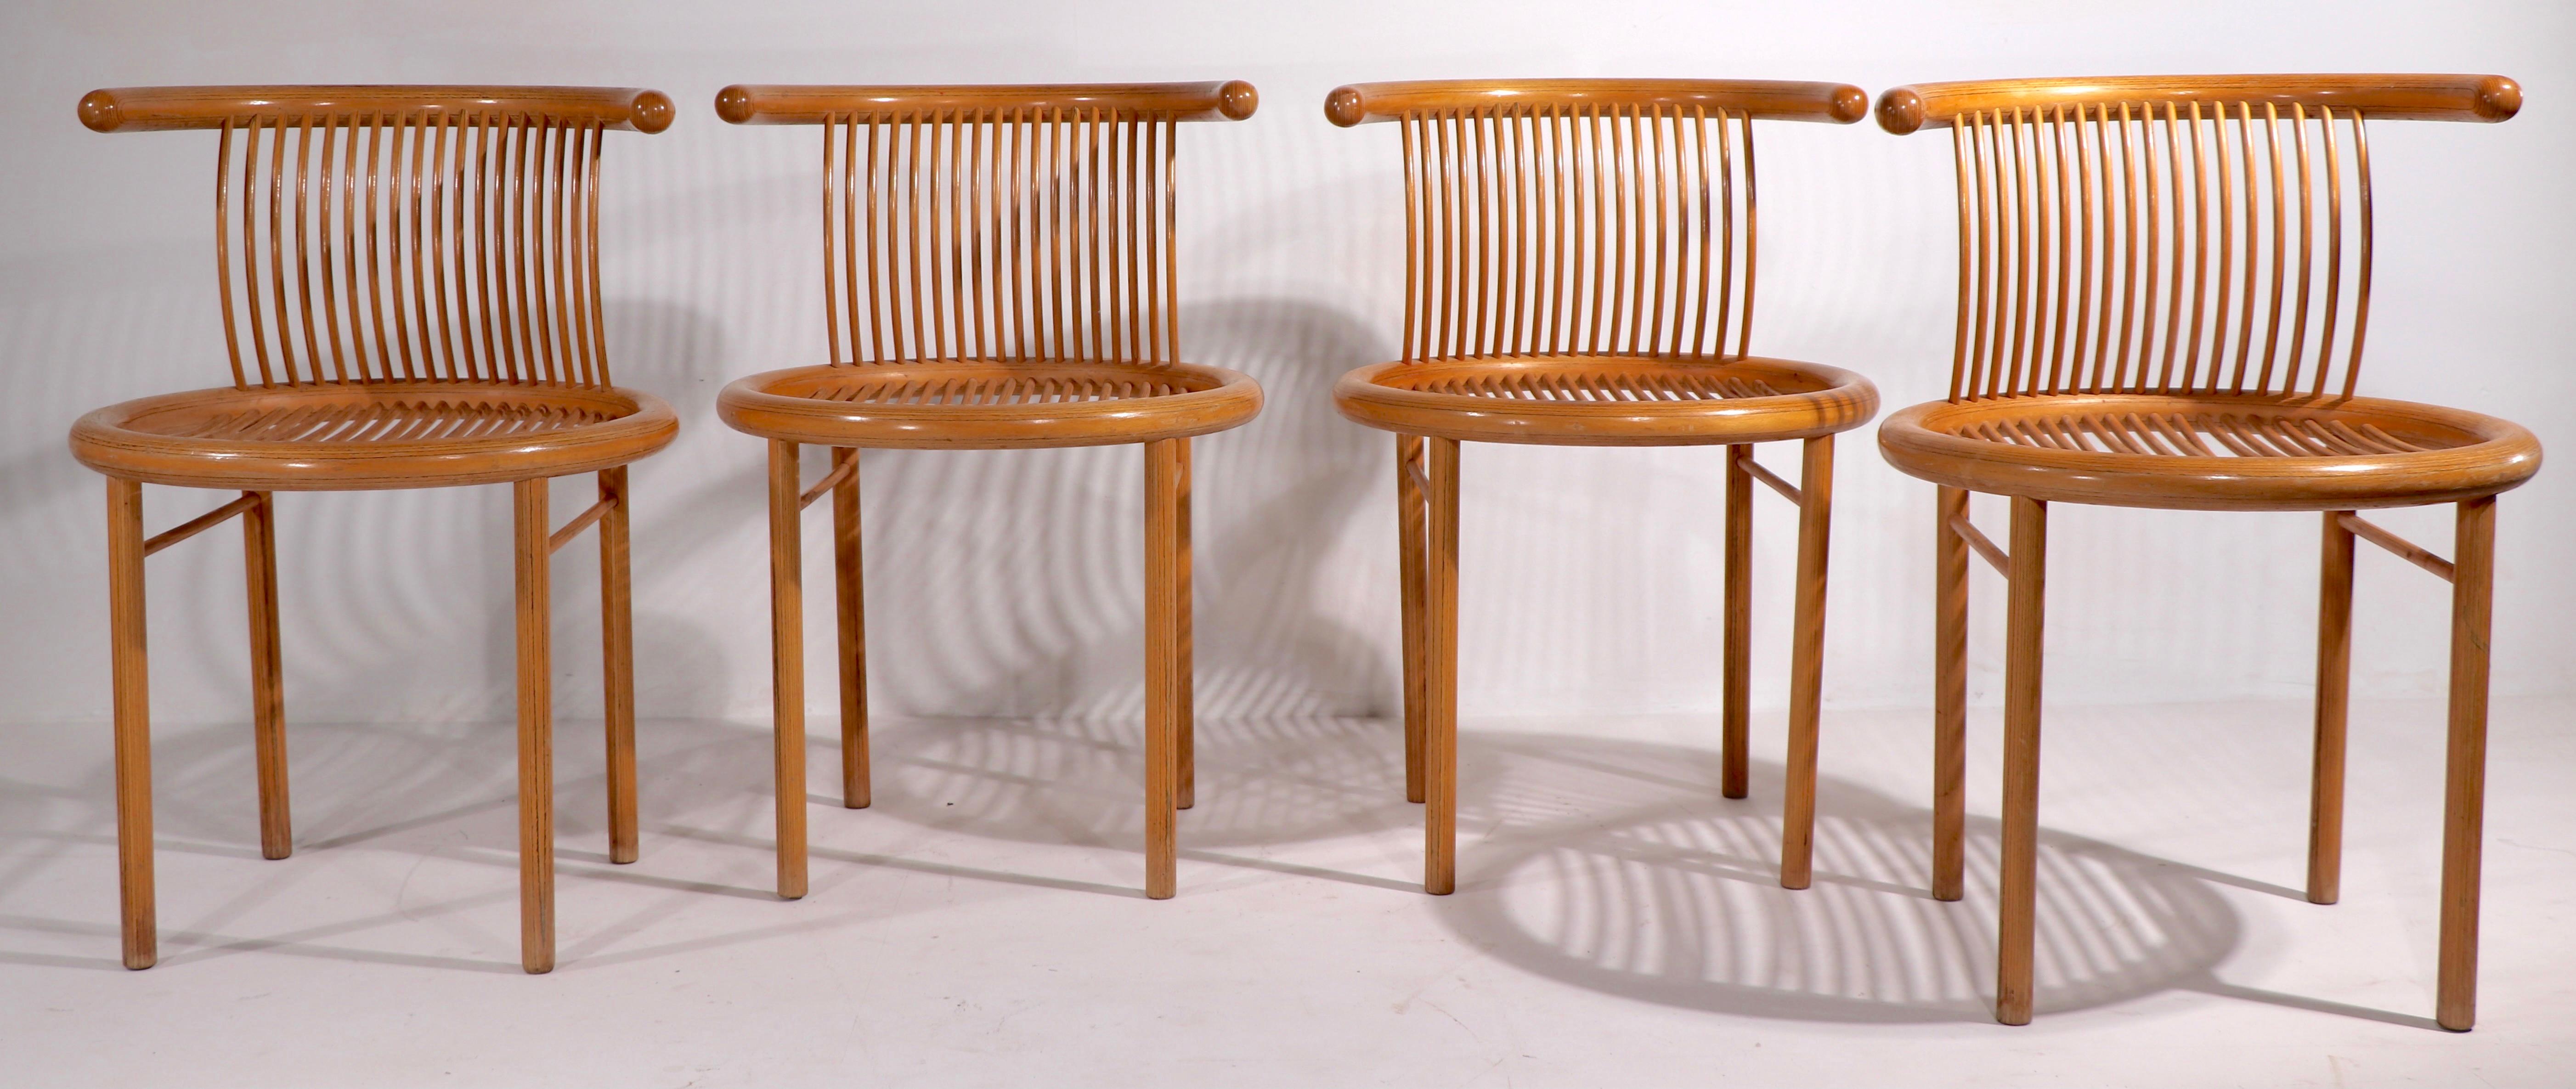 Set of 4 Mid Century Dining Chairs by Helmut Lubke 1